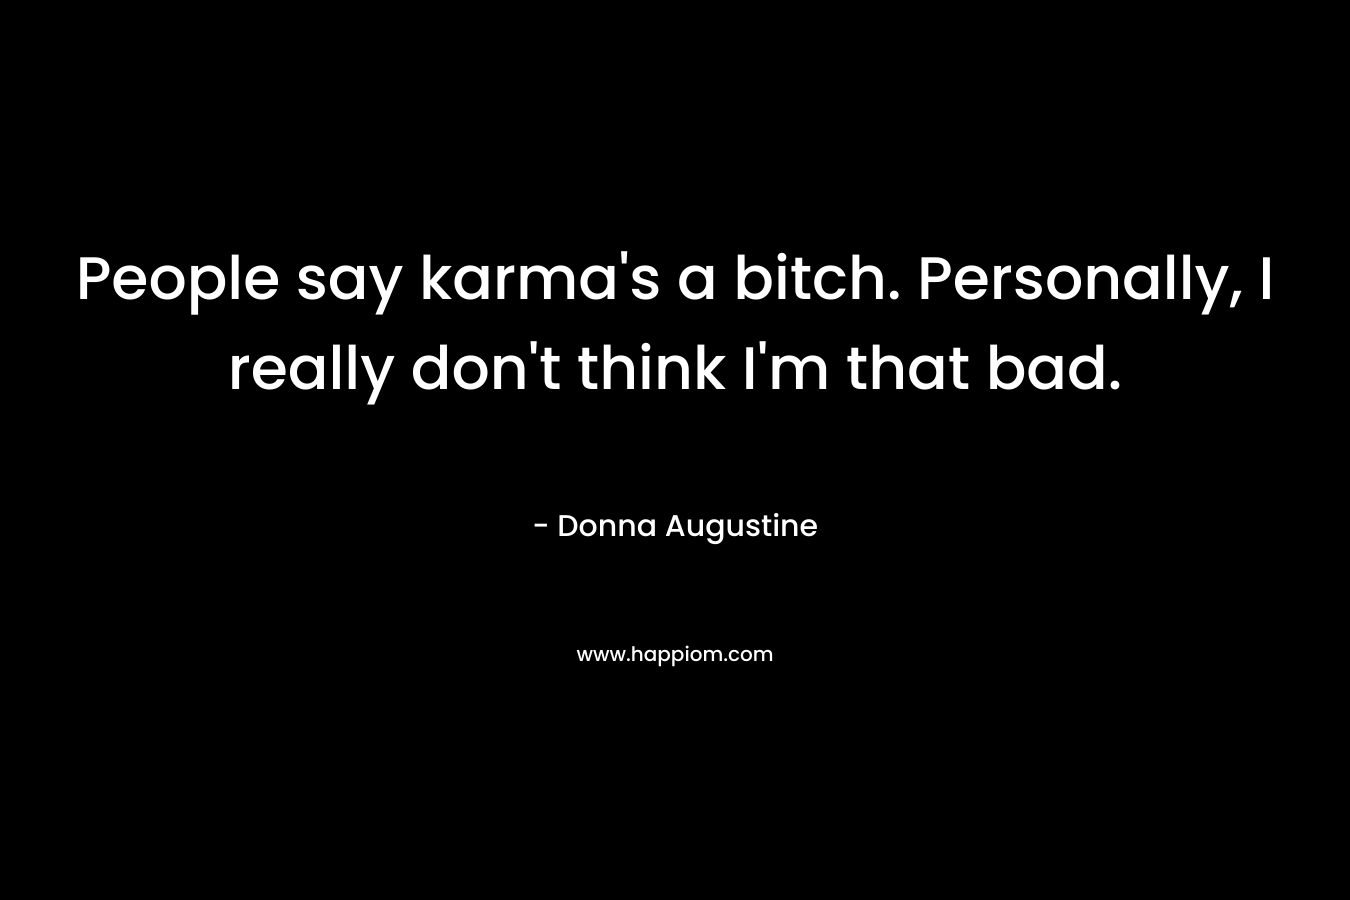 People say karma’s a bitch. Personally, I really don’t think I’m that bad. – Donna Augustine